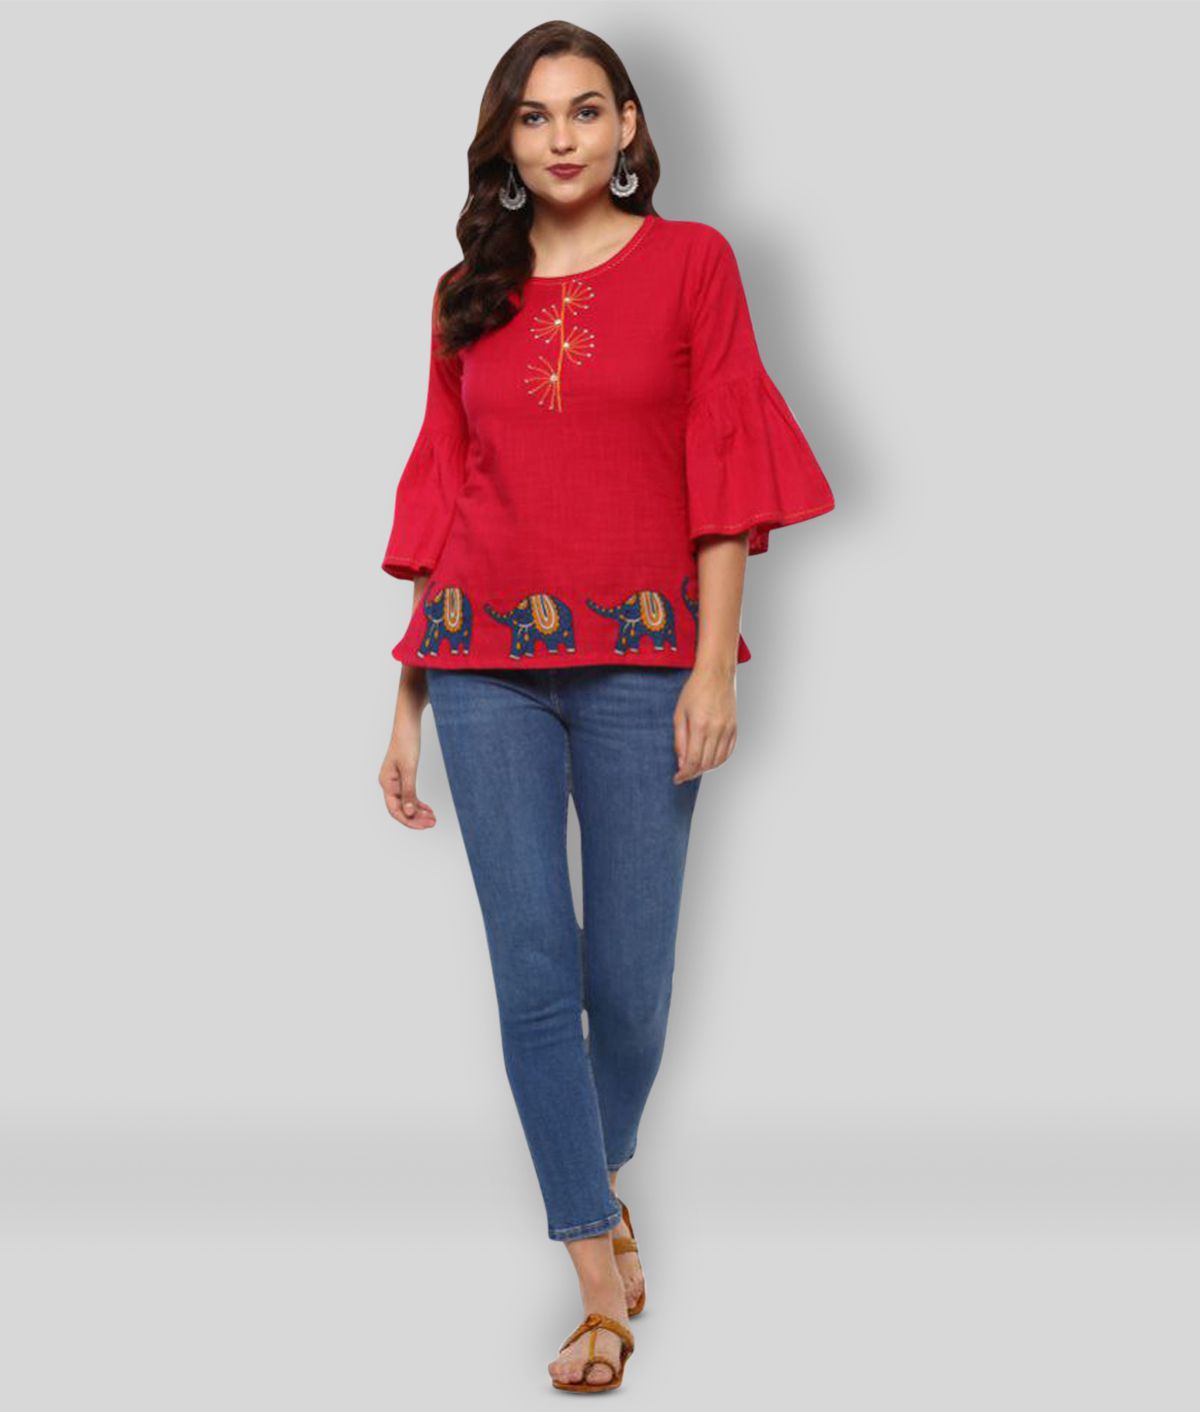     			Yash Gallery - Red Cotton Women's Regular Top ( Pack of 1 )